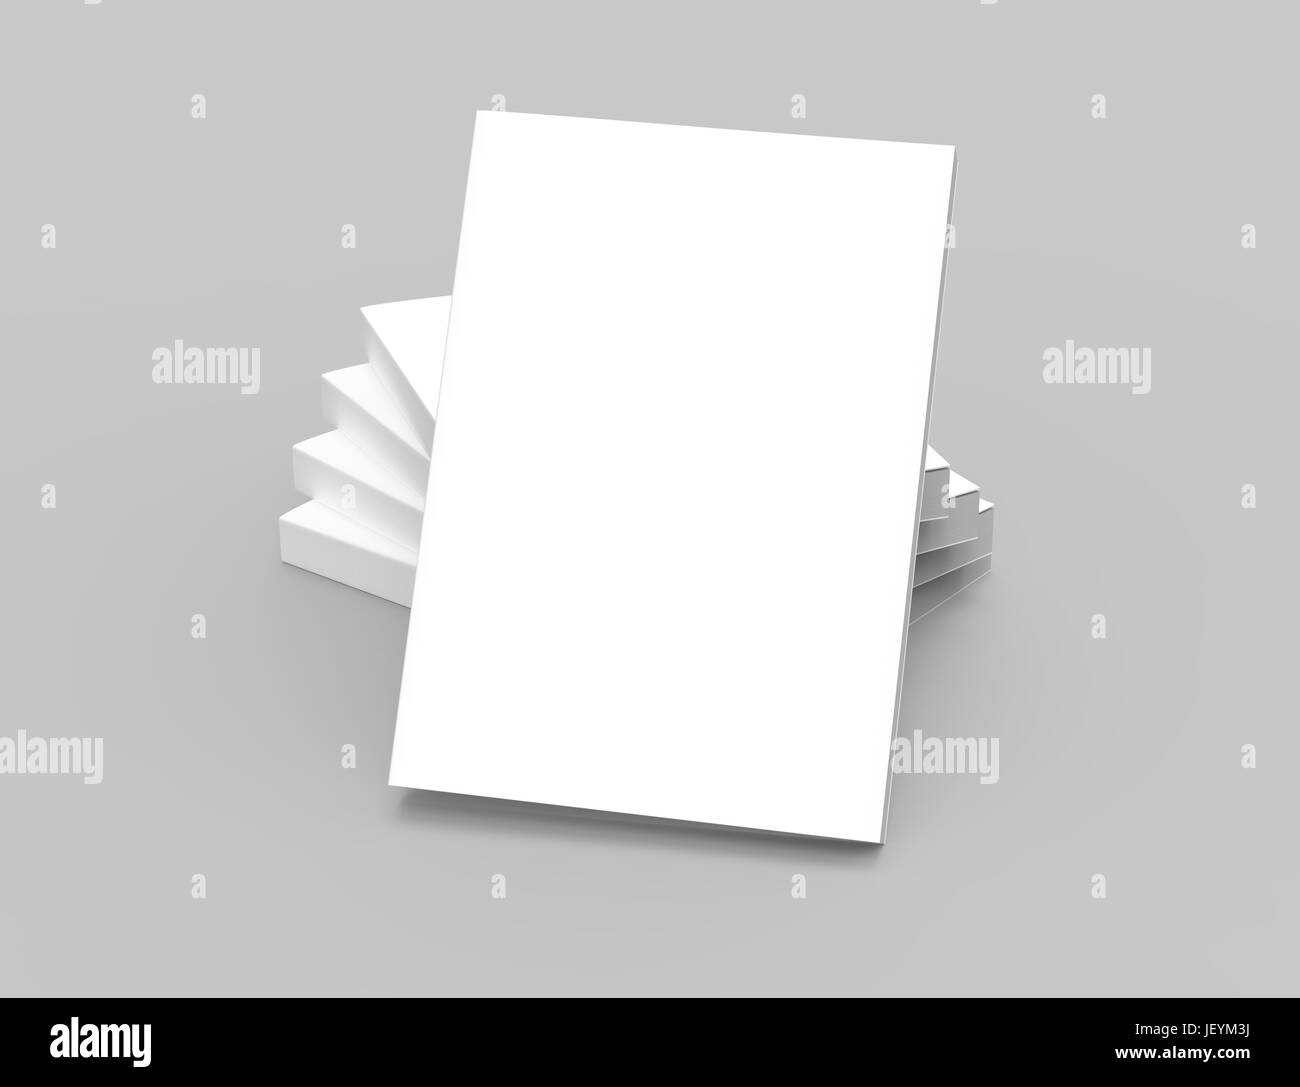 one left tilt book leaning on four stacking blank right tilt books placed in helical shape, all closed isolated gray background, 3d rendering elevated Stock Photo